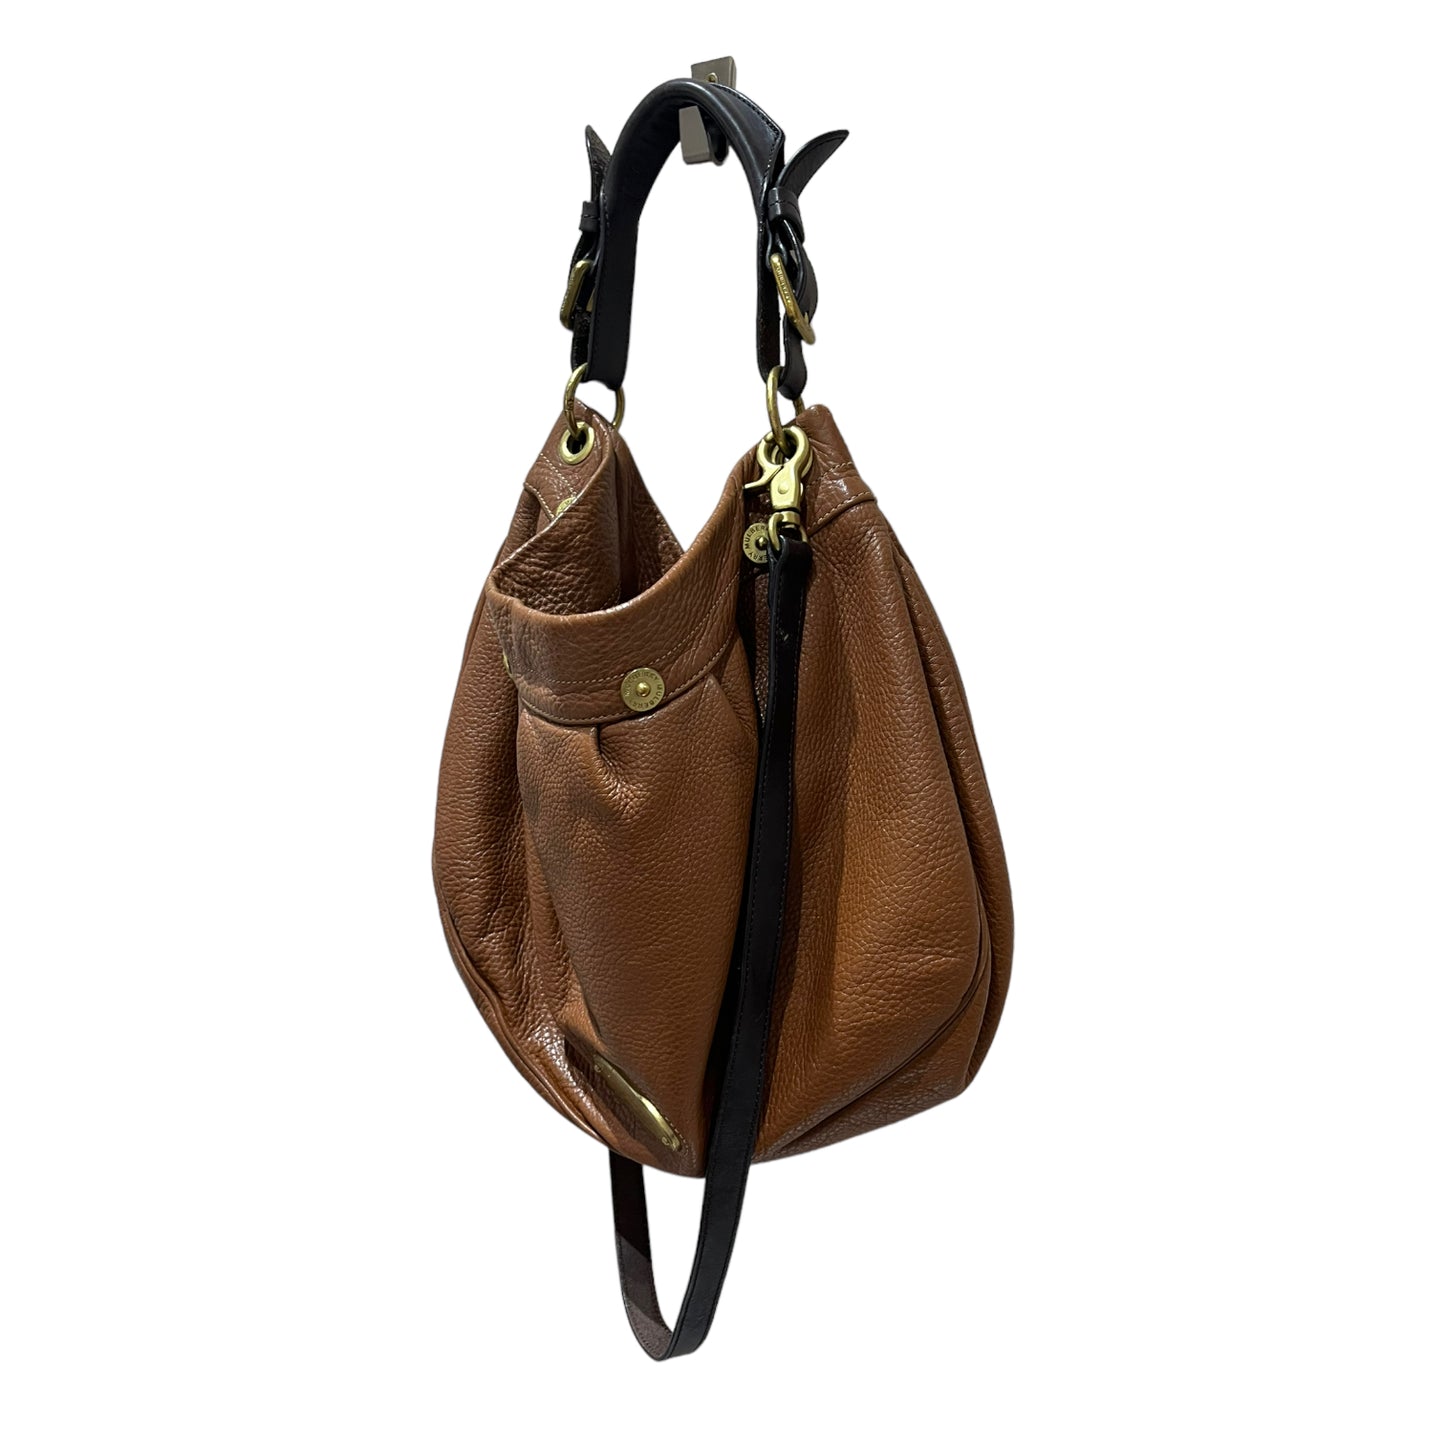 Mulberry Mitzy Tan Leather Bag